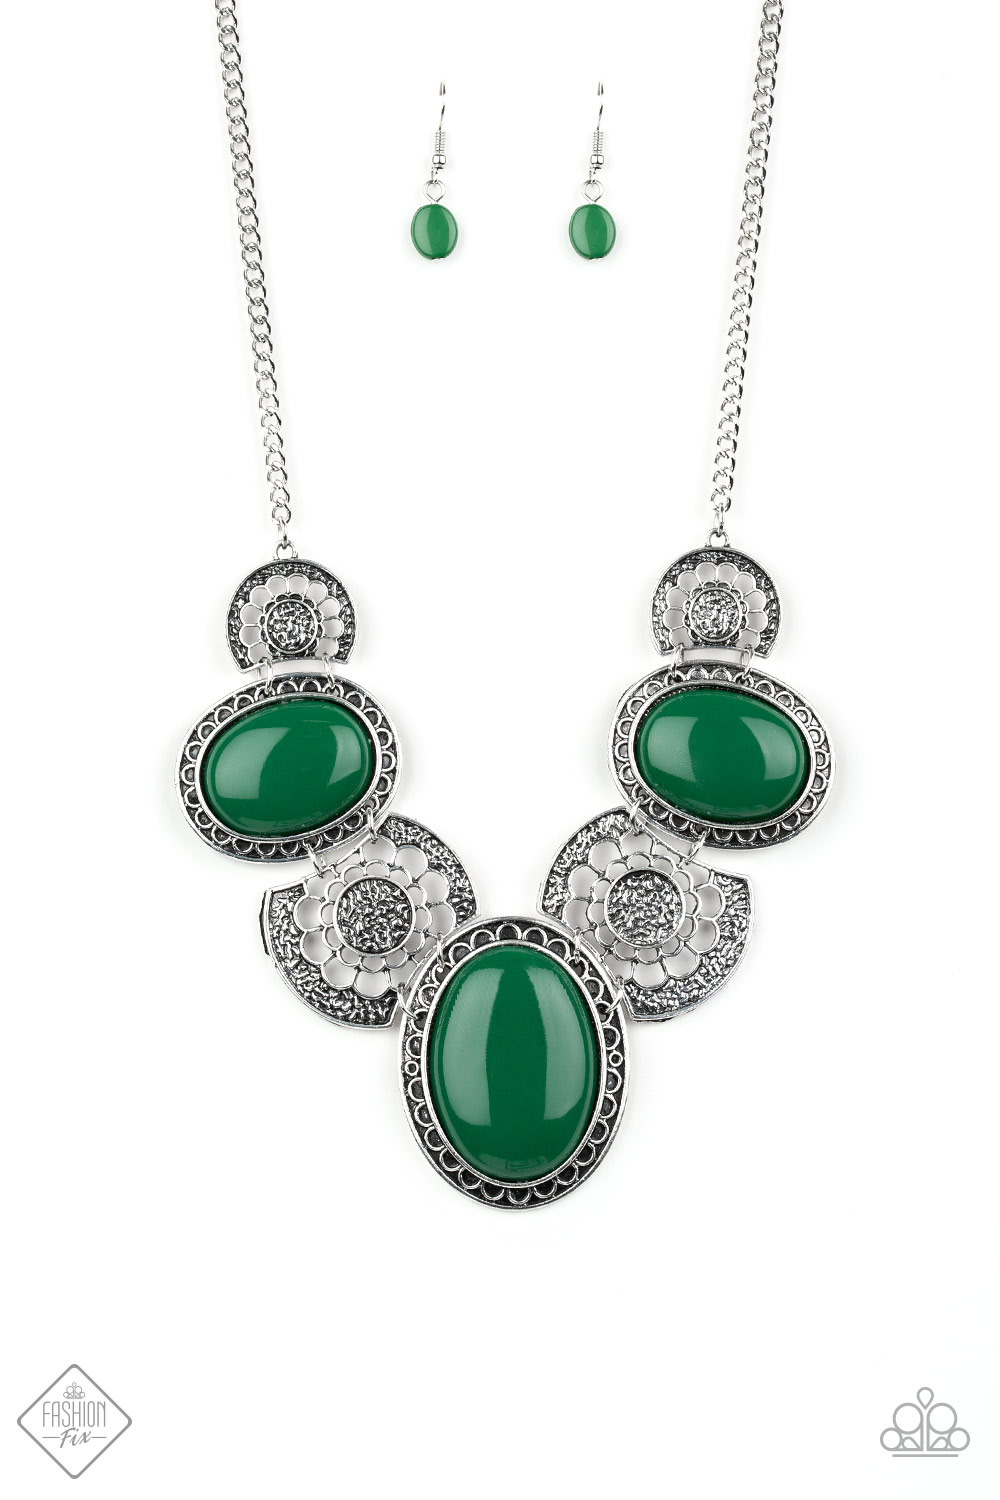 The Medallion-aire Paparazzi Accessories Necklace with Earrings